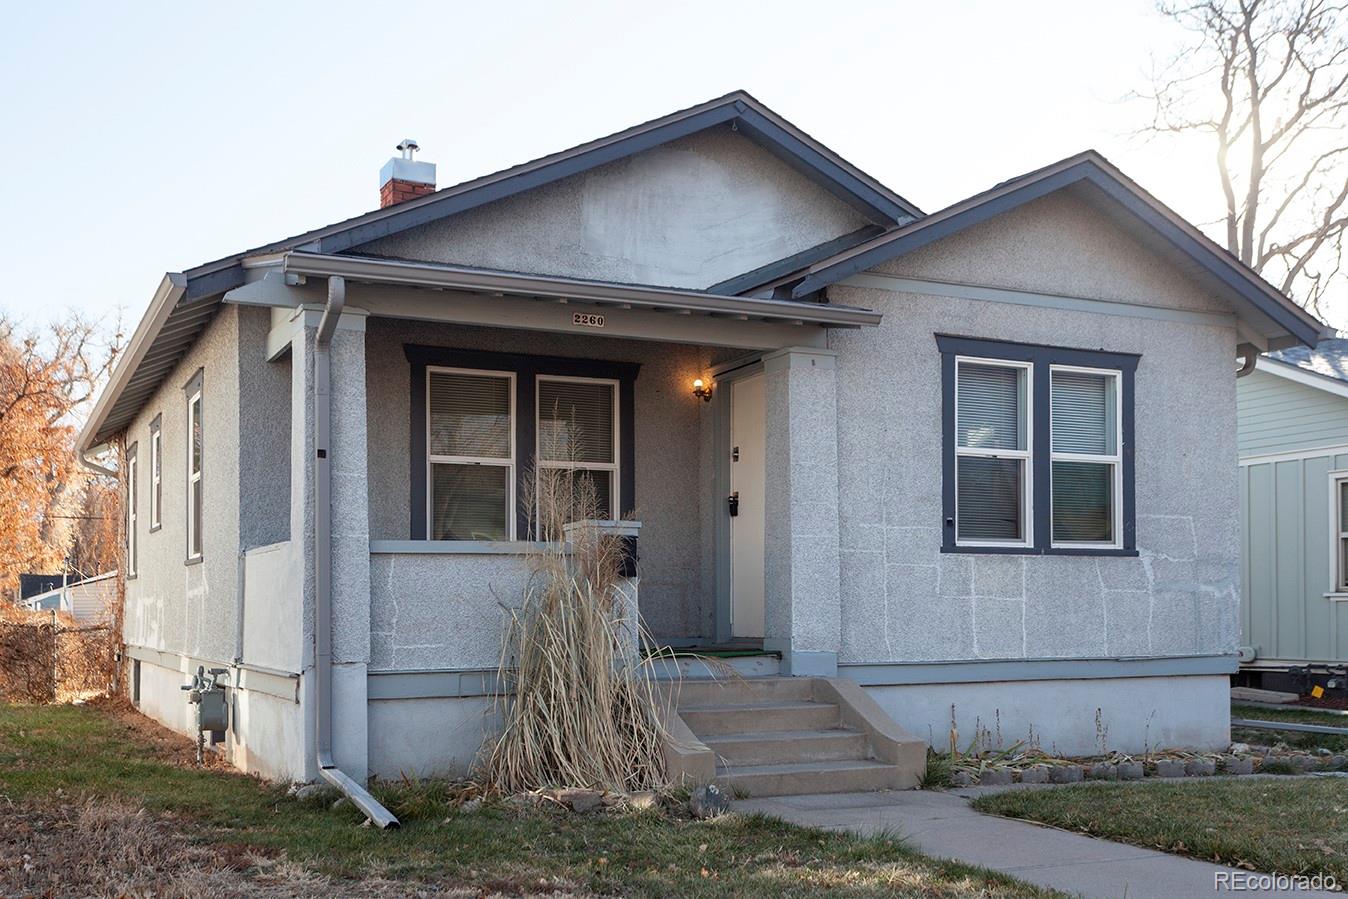 Report Image for 2260 S Downing Street,Denver, Colorado